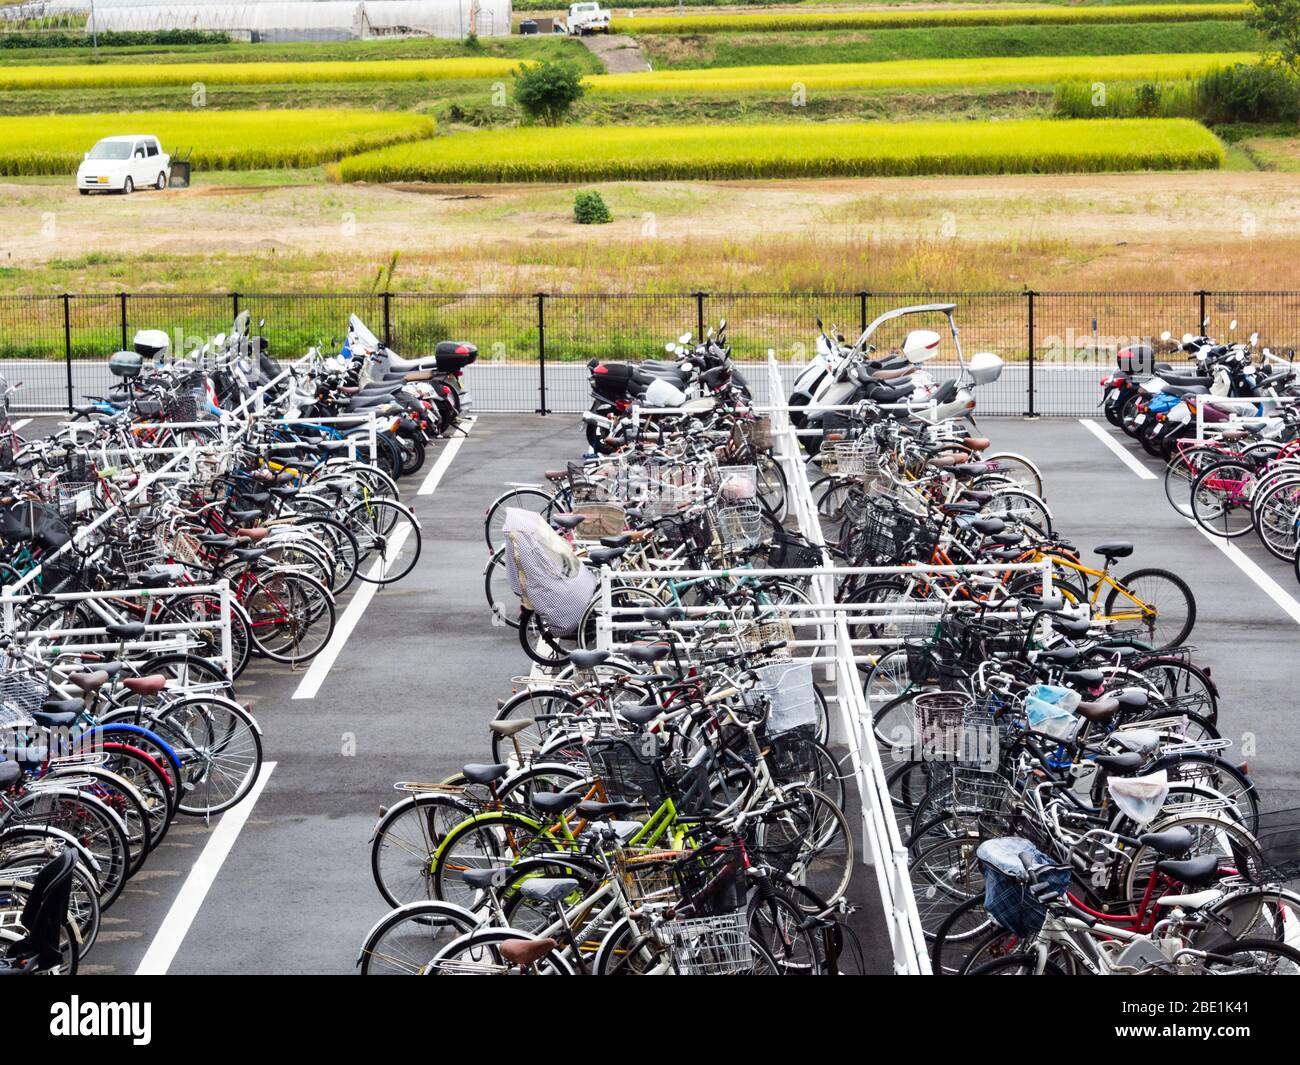 Heguri, Japan - October 1, 2015: Bicycles parked in front of JR train station in rural Nara prefecture Stock Photo